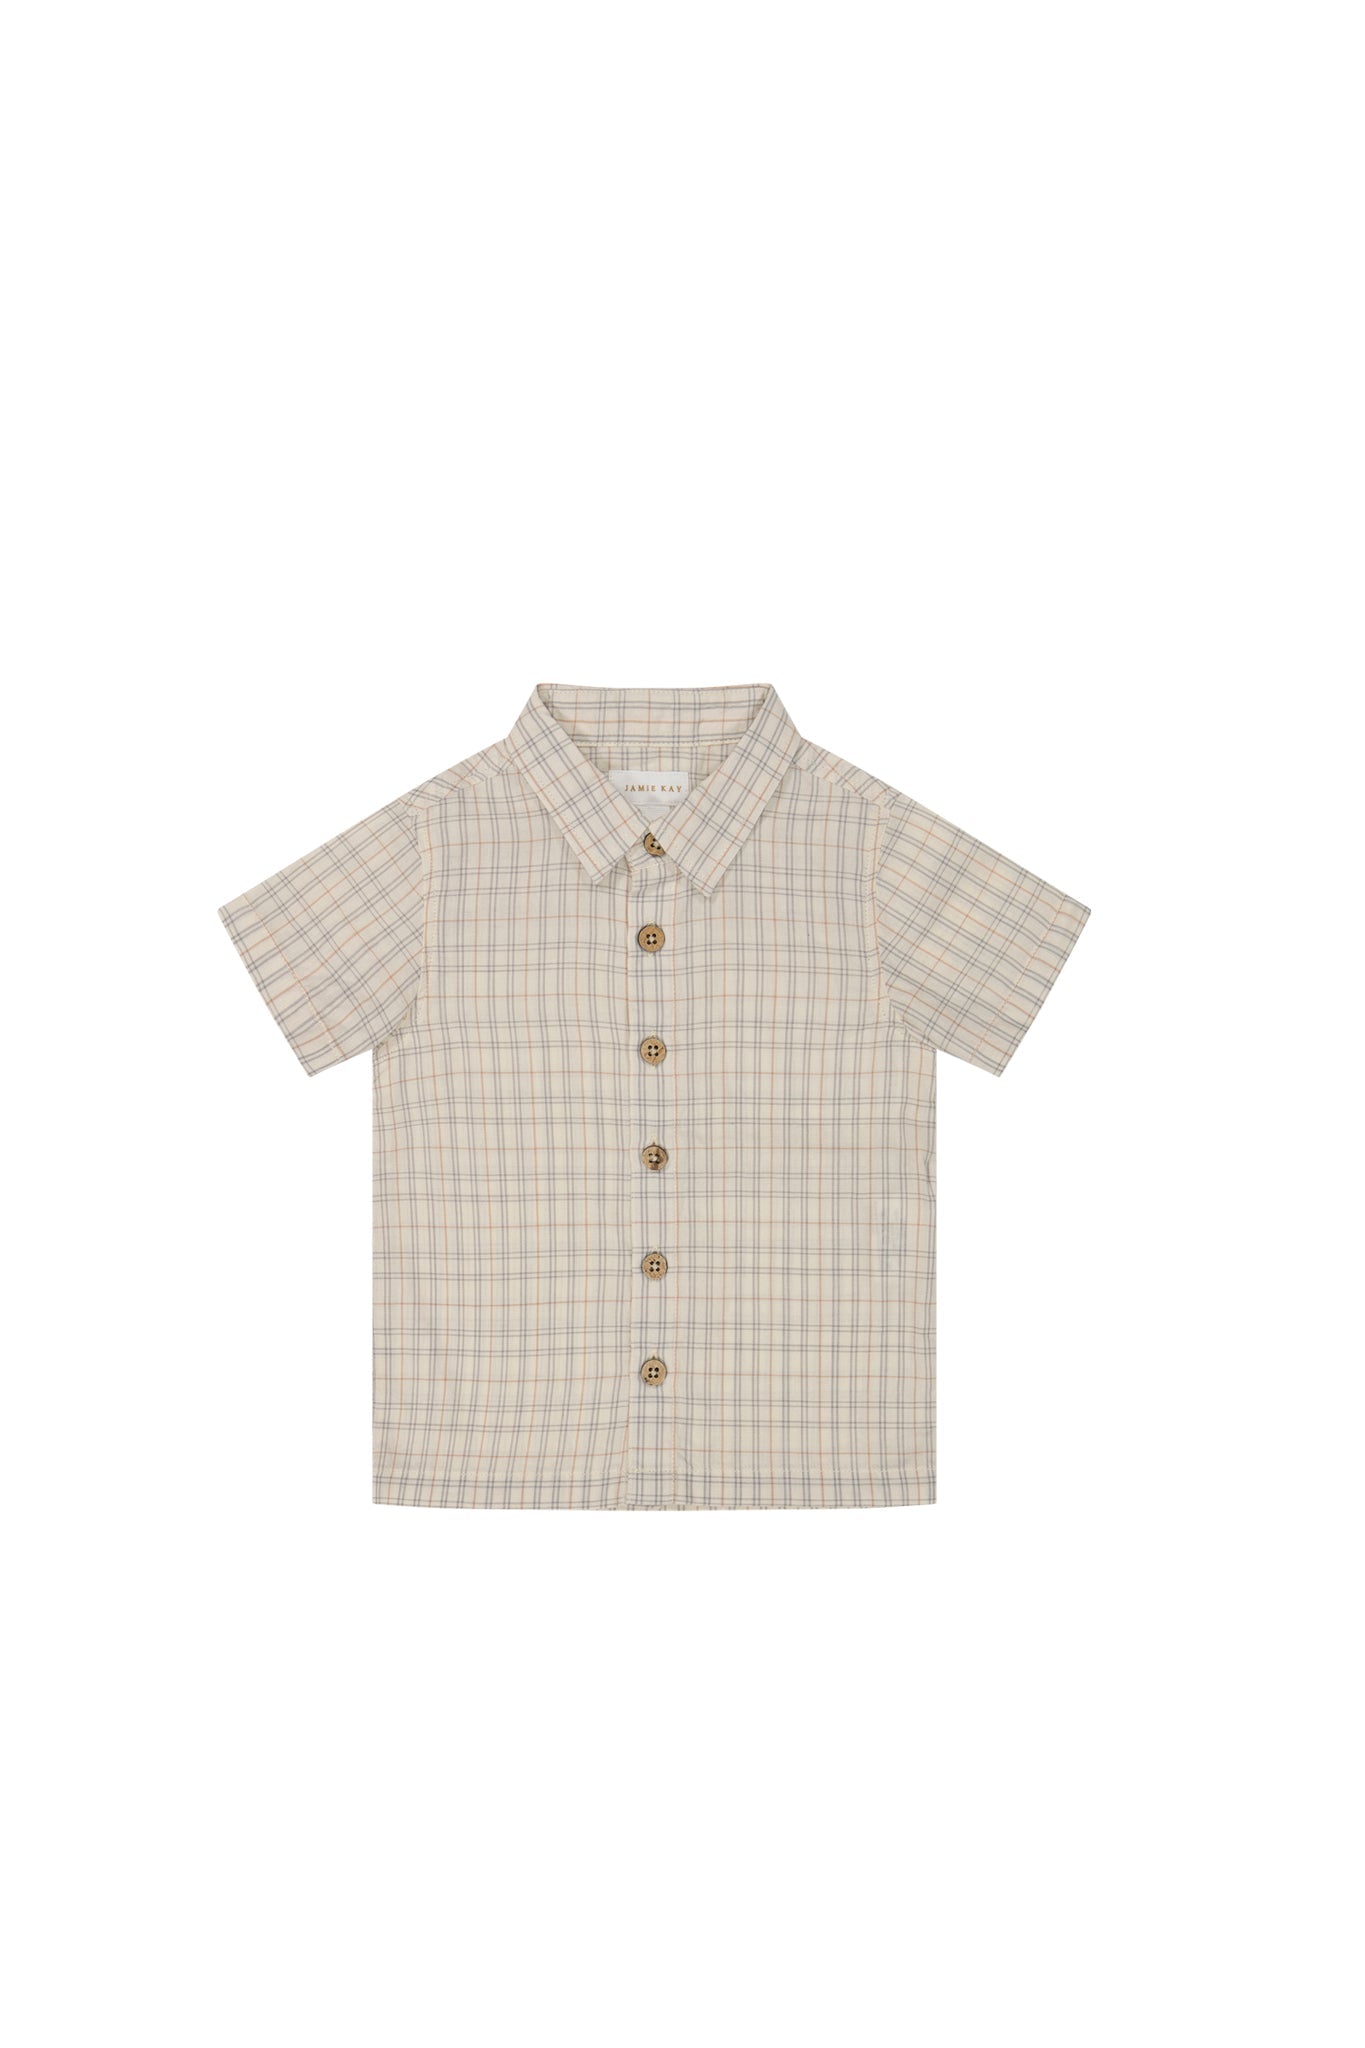 Organic Cotton Quentin Short Sleeve Shirt - Billy Check (Almost Gone)